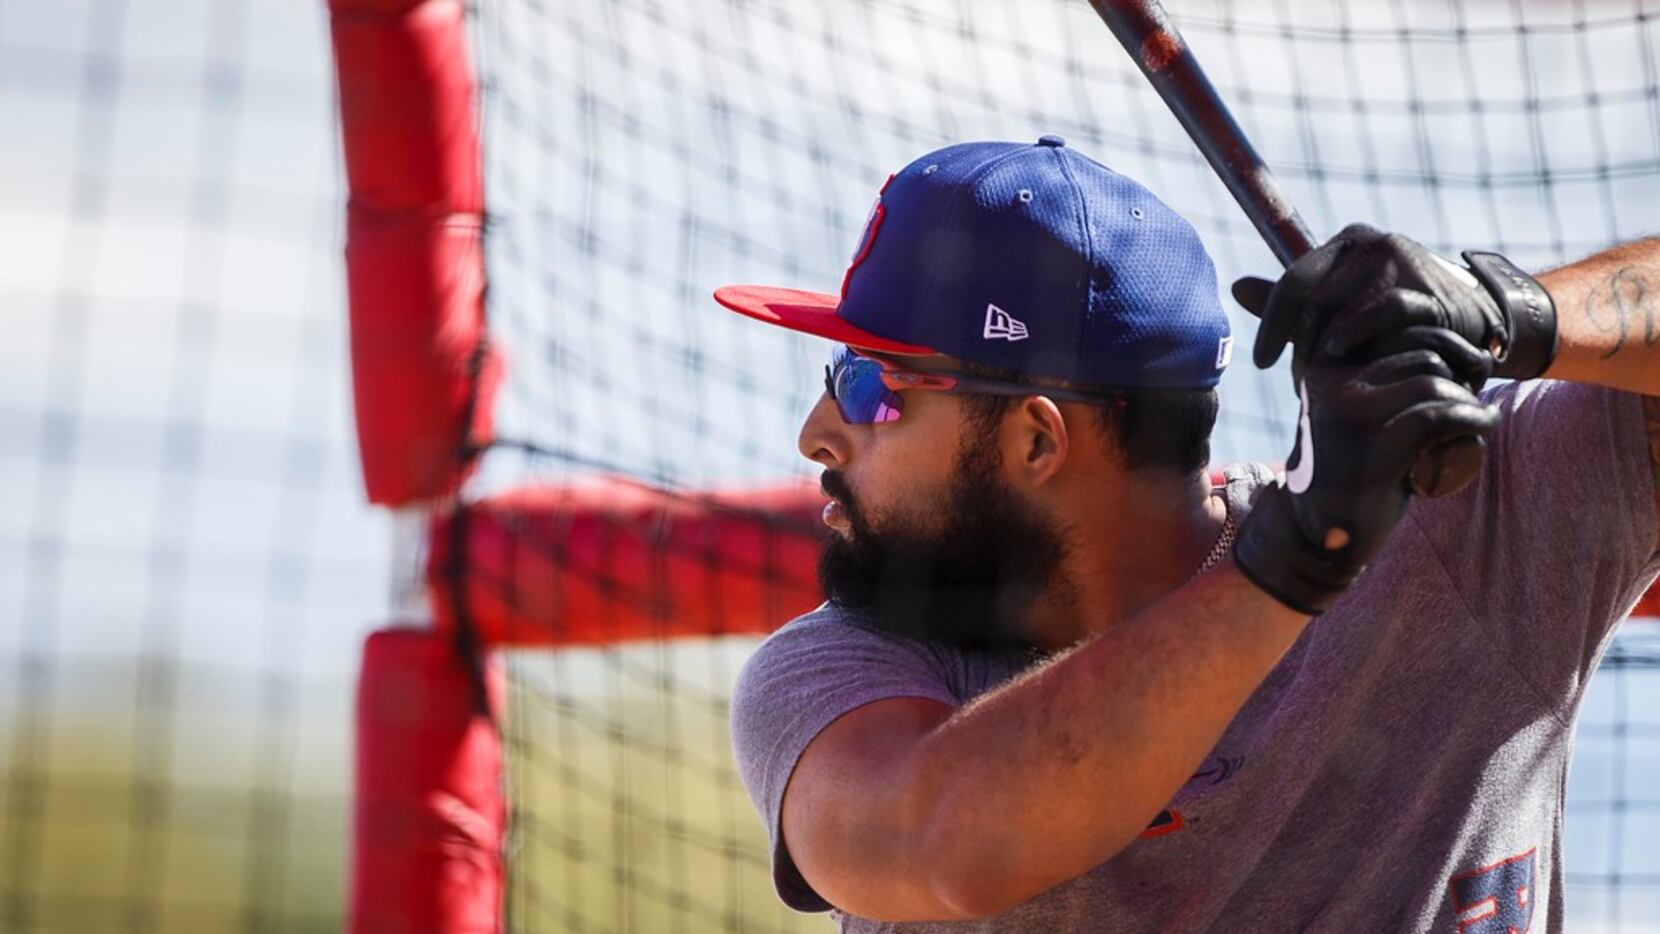 Texas Rangers infielder Rougned Odor takes batting practice during a spring training workout...